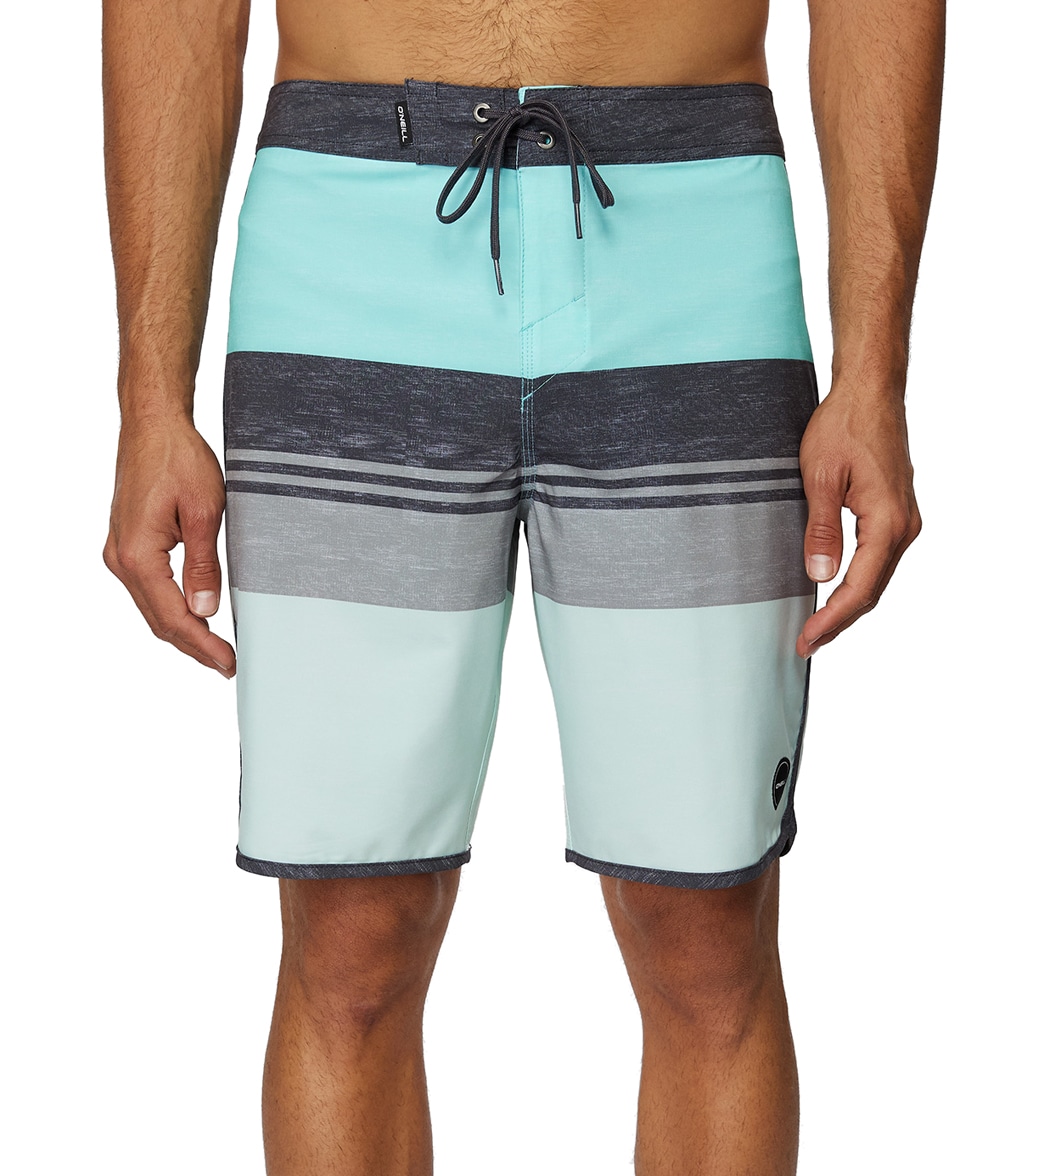 O'neill Men's 19 Four Square Stretch Boardshorts - Turquoise 30 - Swimoutlet.com